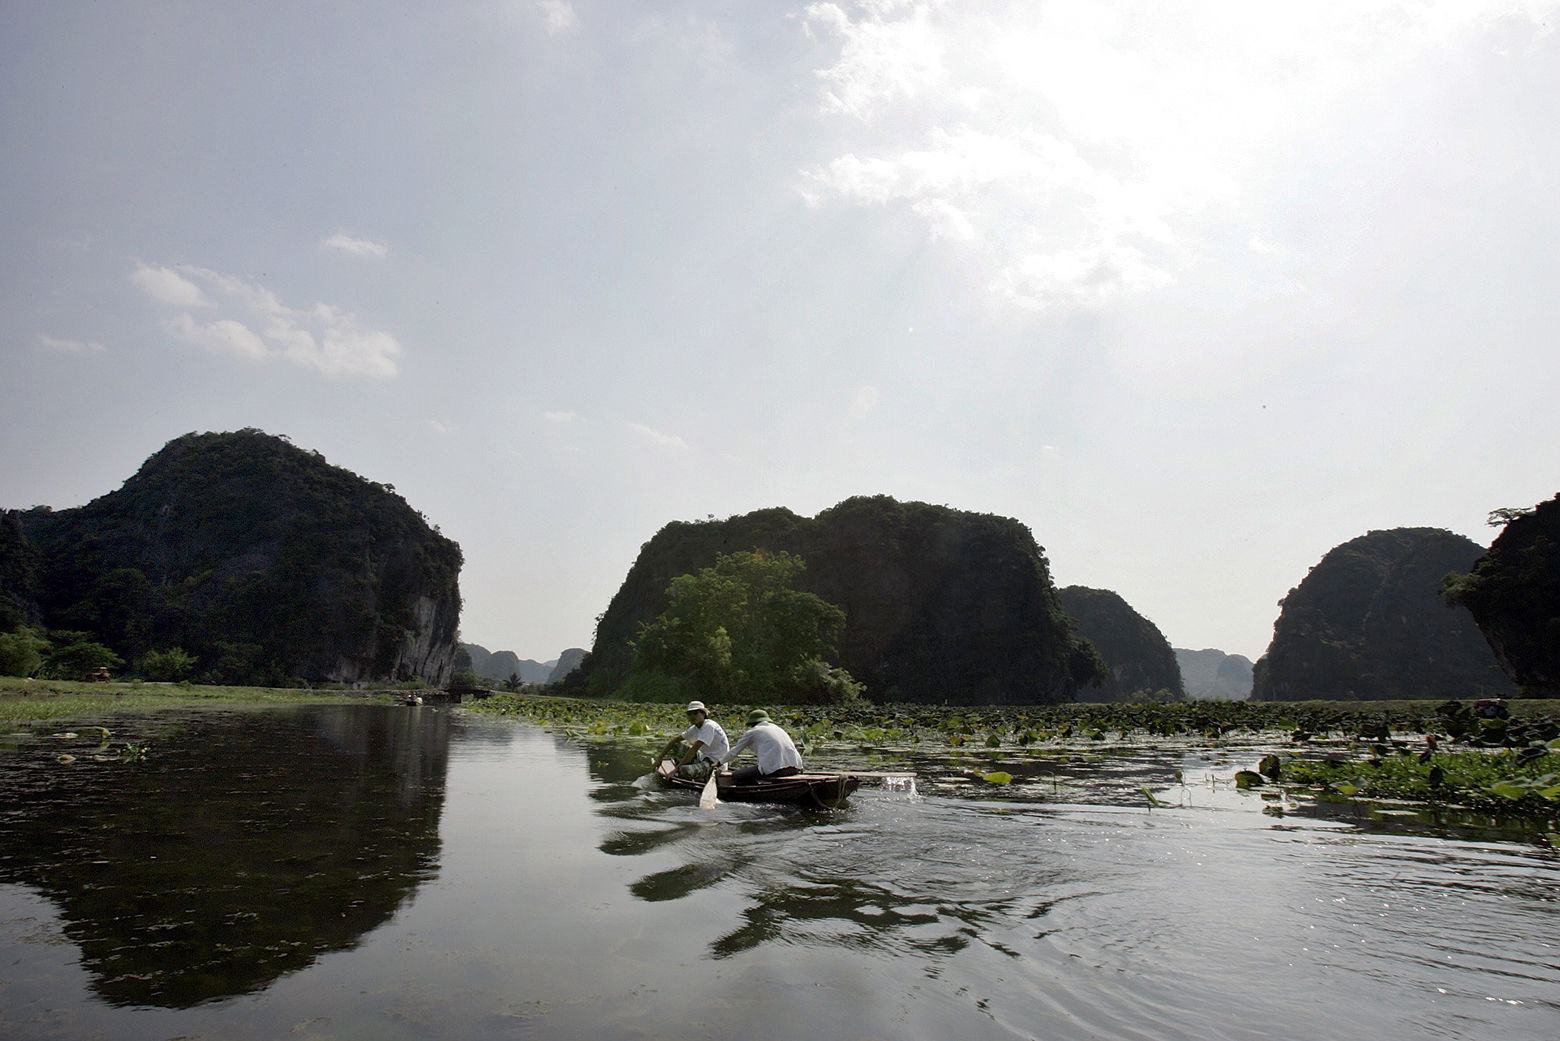 A boat passes through Tam Coc in Ninh Binh Province, about 100 kilometer ( 62 miles) from Hanoi, Vietnam, Wednesday, Sept. 19, 2007. Tam Coc, which means three caves, is also referred to as Halong Bay on Land. Tourists often used boats to explore the caves on the river. (AP Photo/Chitose Suzuki)